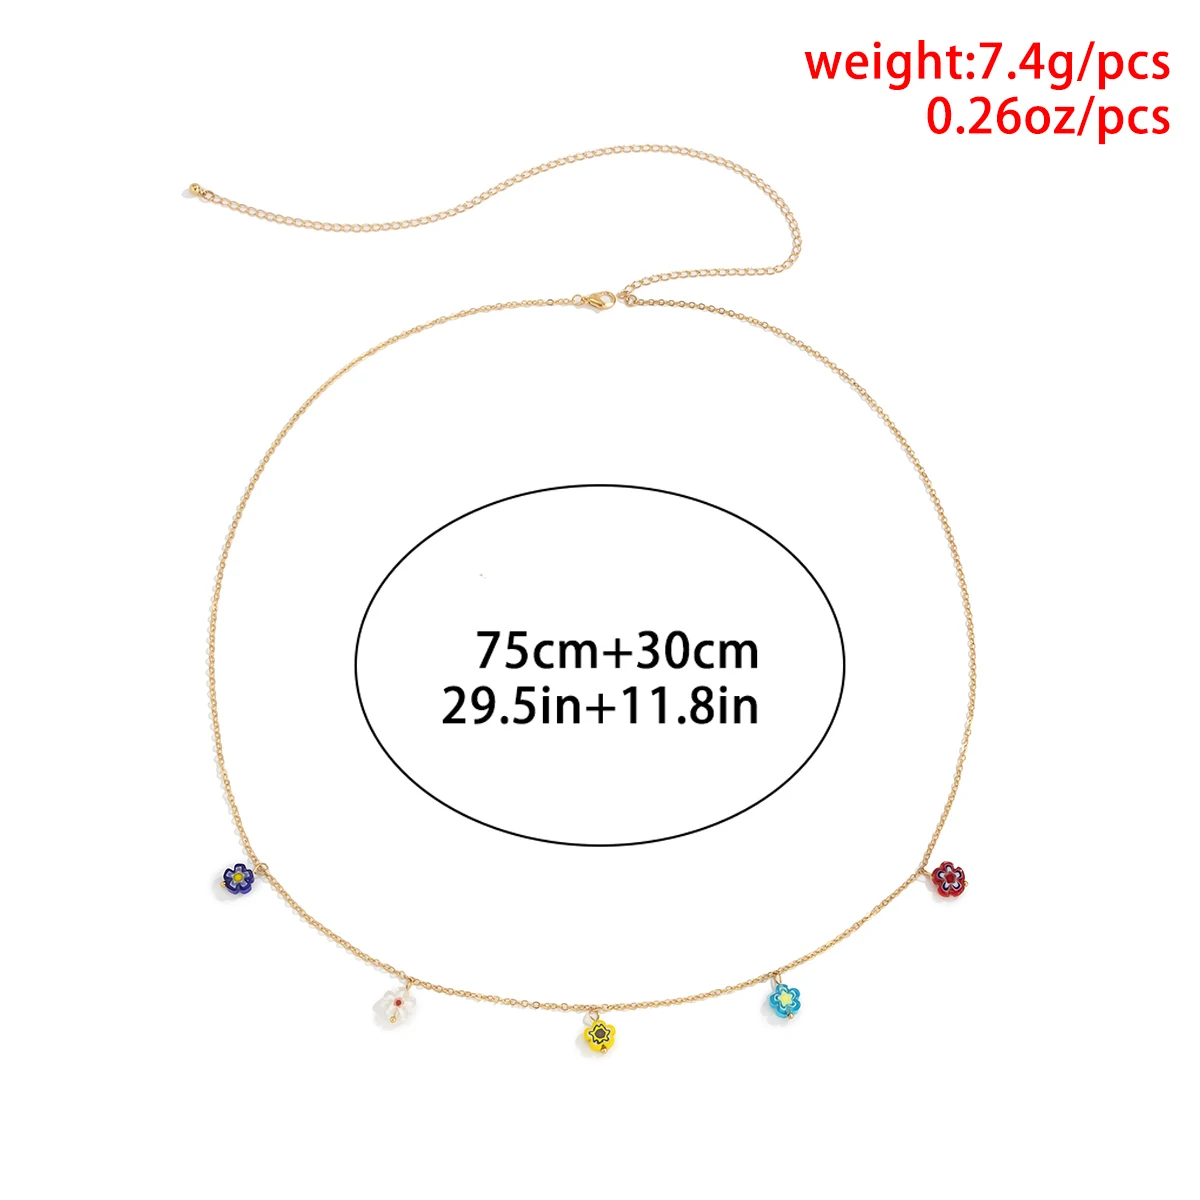 
SHIXIN Colorful Flower Waist Chains Charm Glazed Flowers Belly Chain Cute Thin Body Chain Jewelry for Woman Girl 